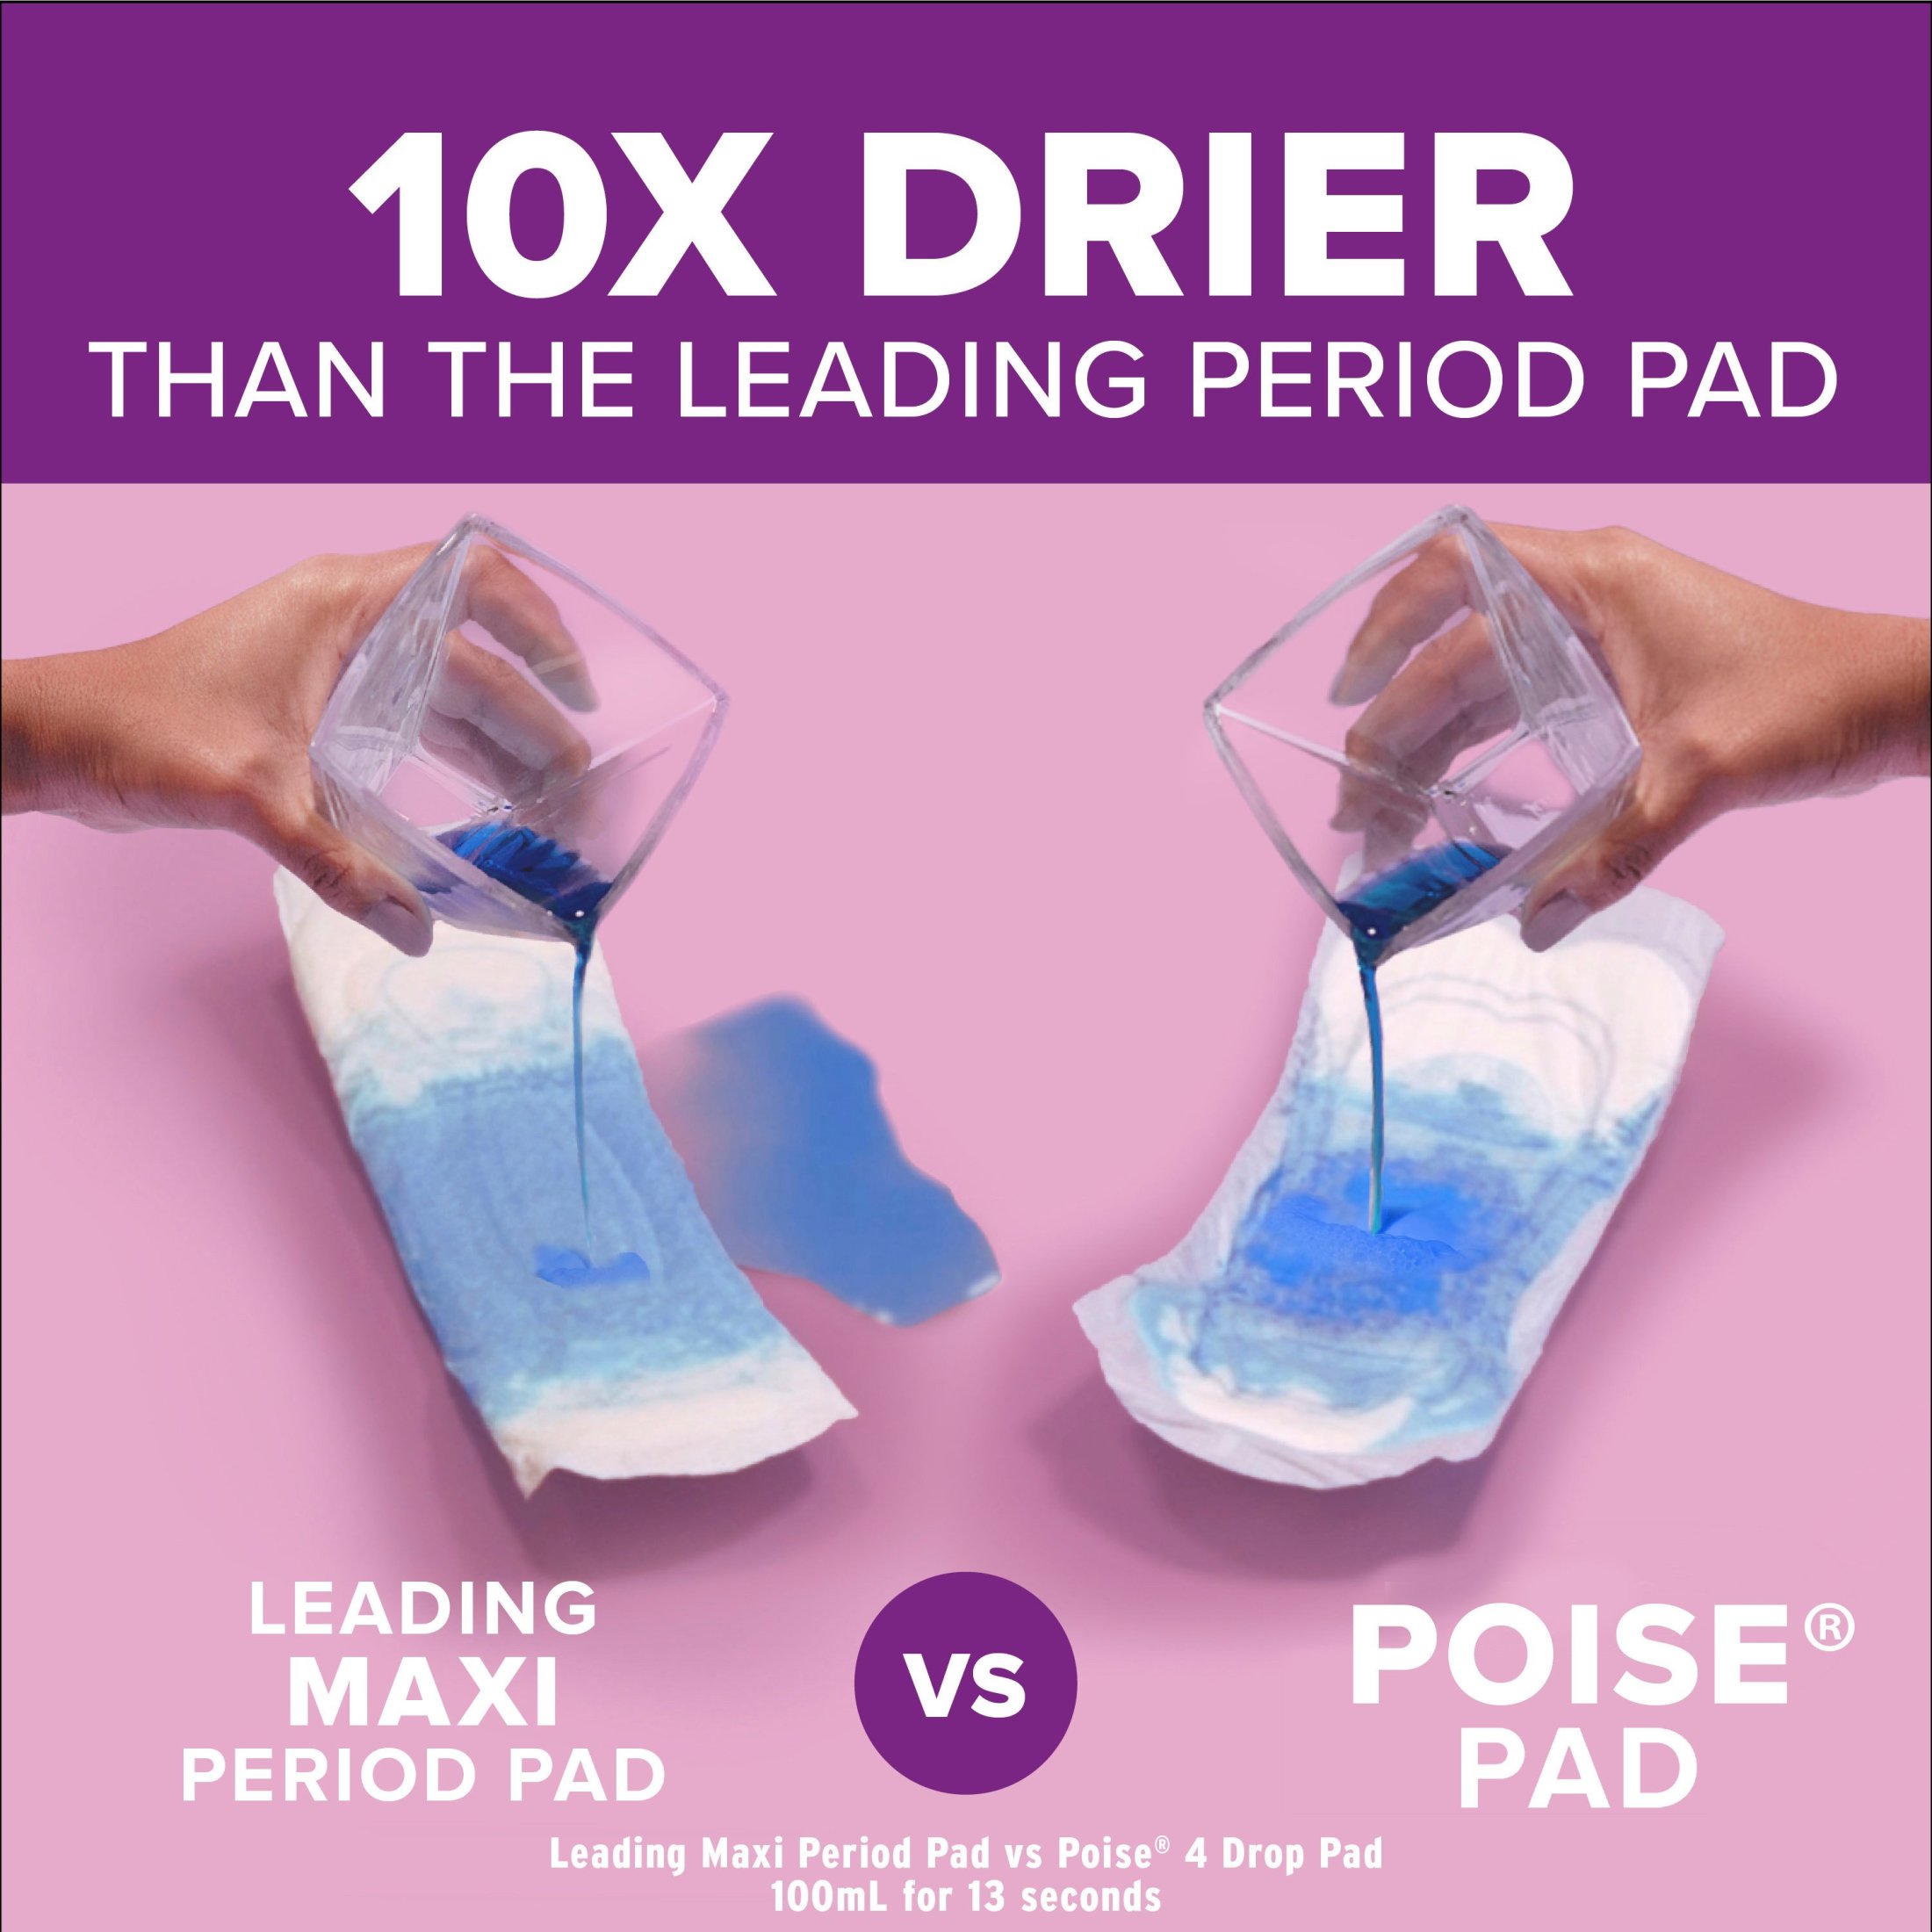 Poise Incontinence Pads for Women, 4 Drop, Moderate Absorbency, Long, 54Ct - image 3 of 8